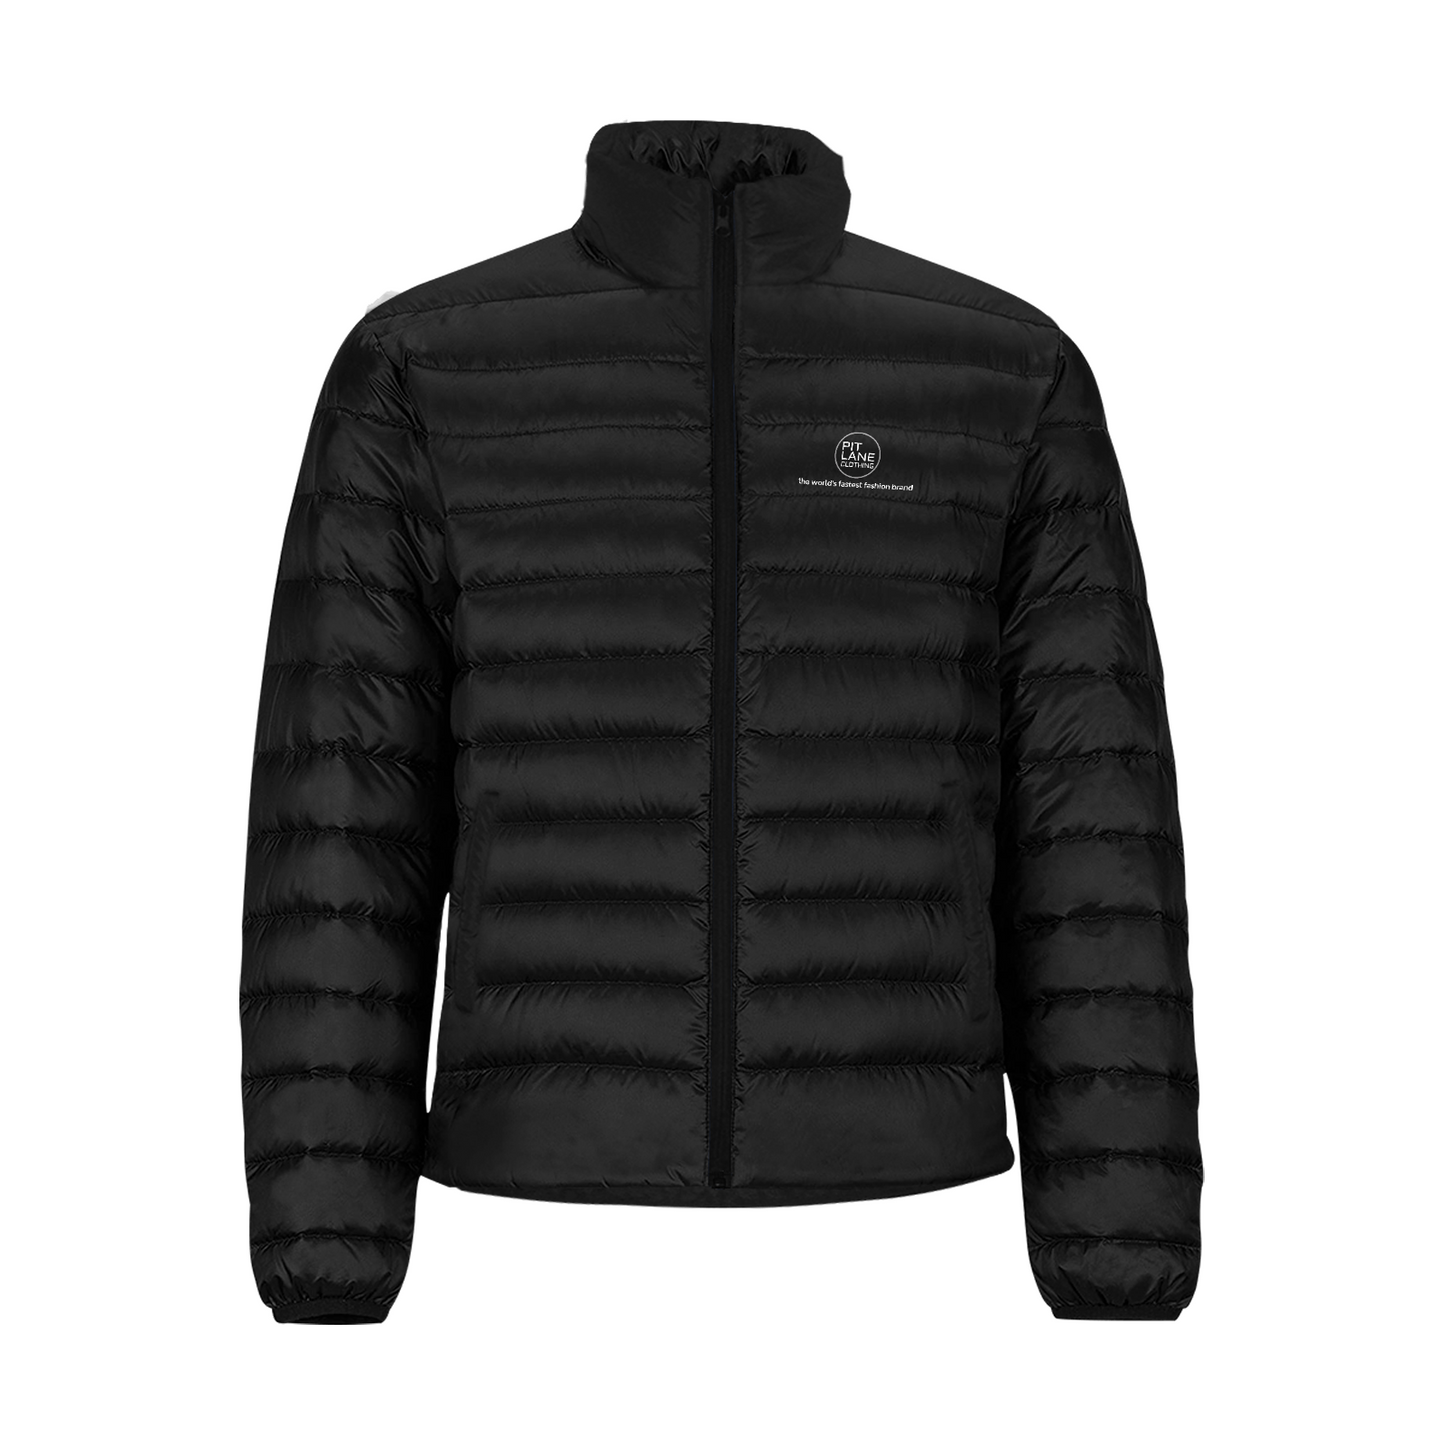 PIT LANE CLOTHING Team Quilted Puffer jacket